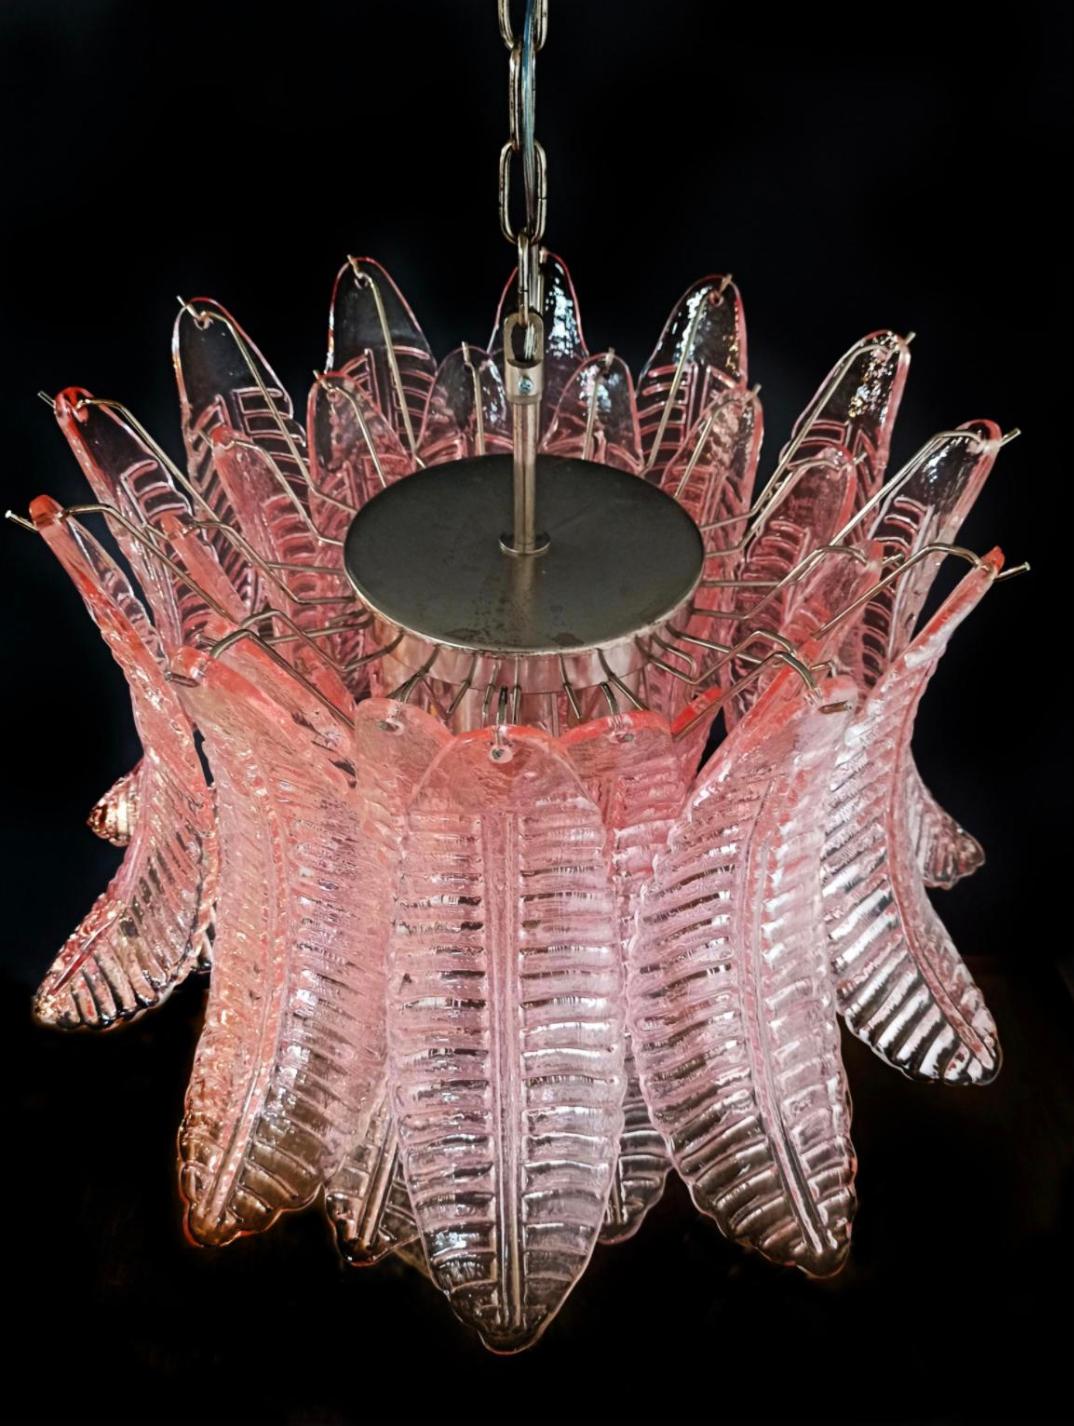 Beautiful Italian Murano chandelier composed by 36 splendid pink glasses that give a very elegant look. The glasses of this chandelier are real works of art.
Period: 1980s
Dimensions: 47.25 inches (120 cm) height with chain; 21.65 inches (55 cm)